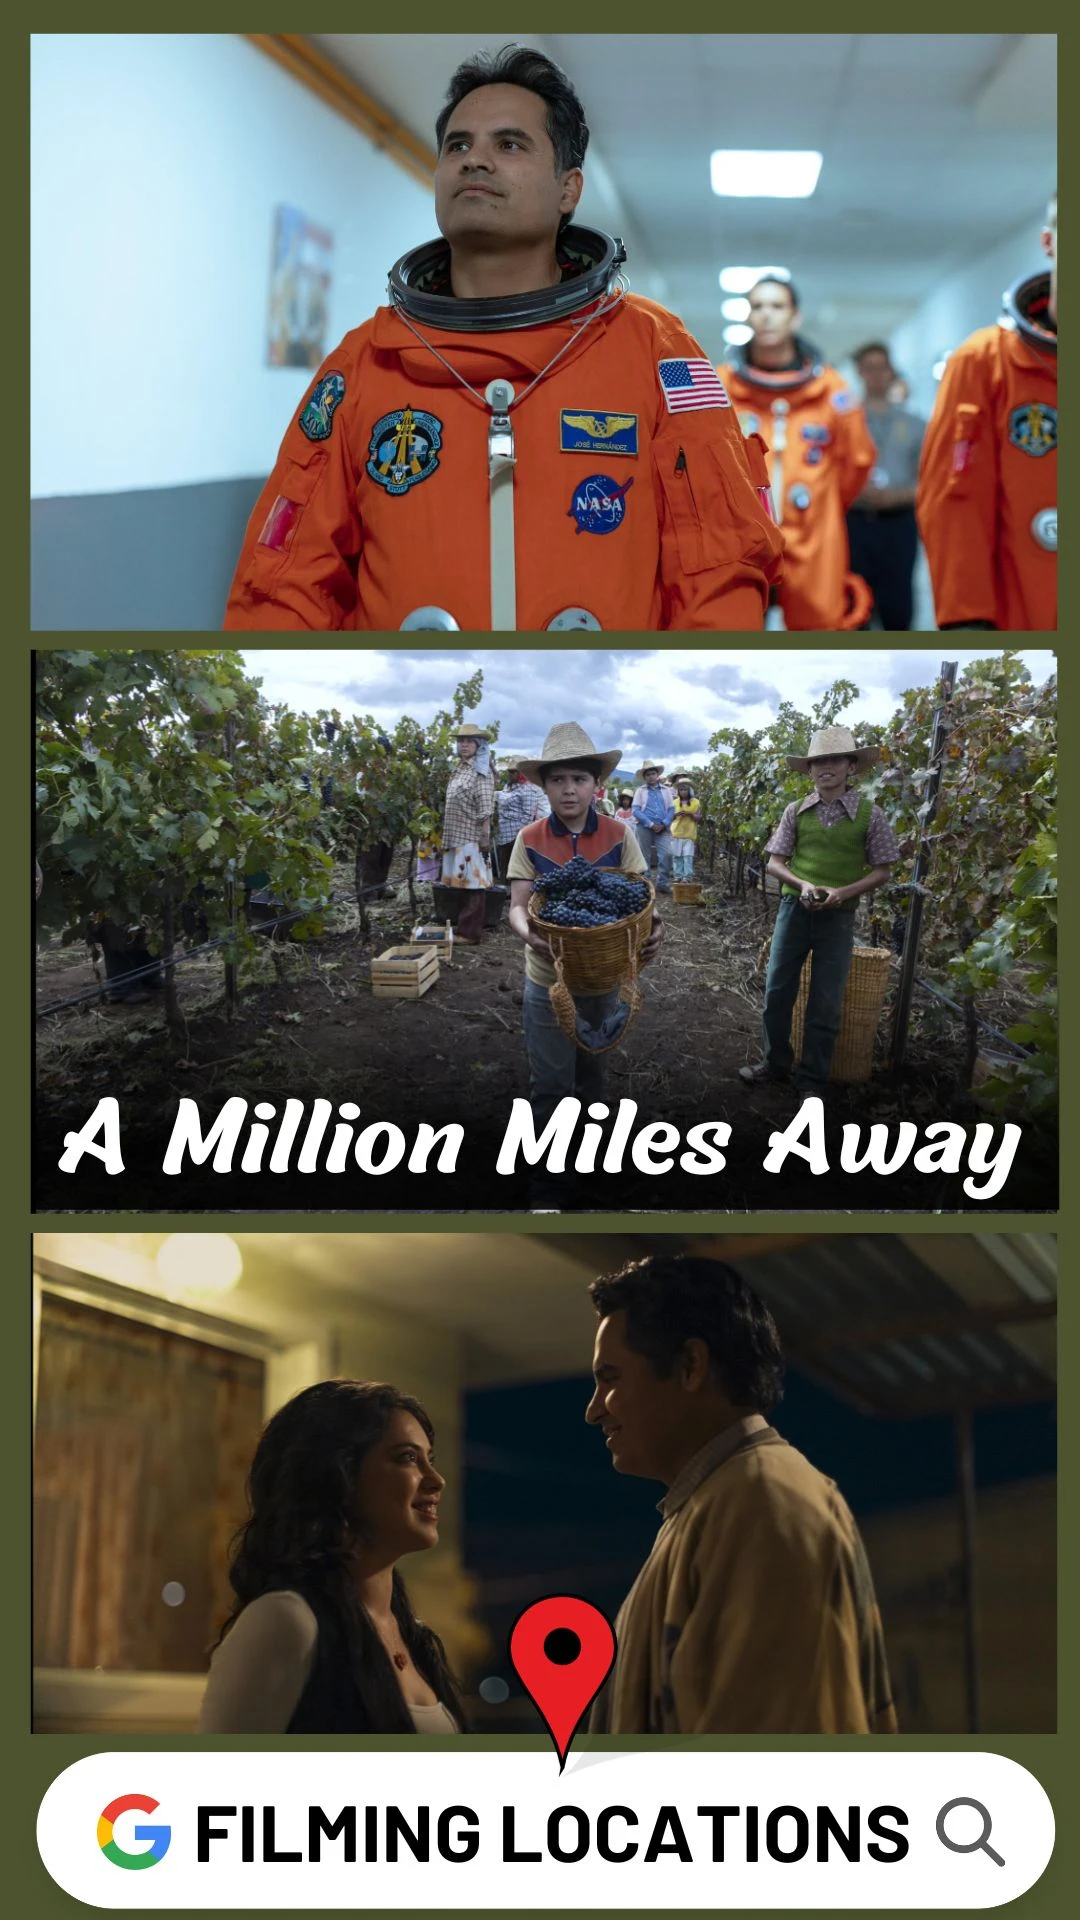 A Million Miles Away Filming Locations